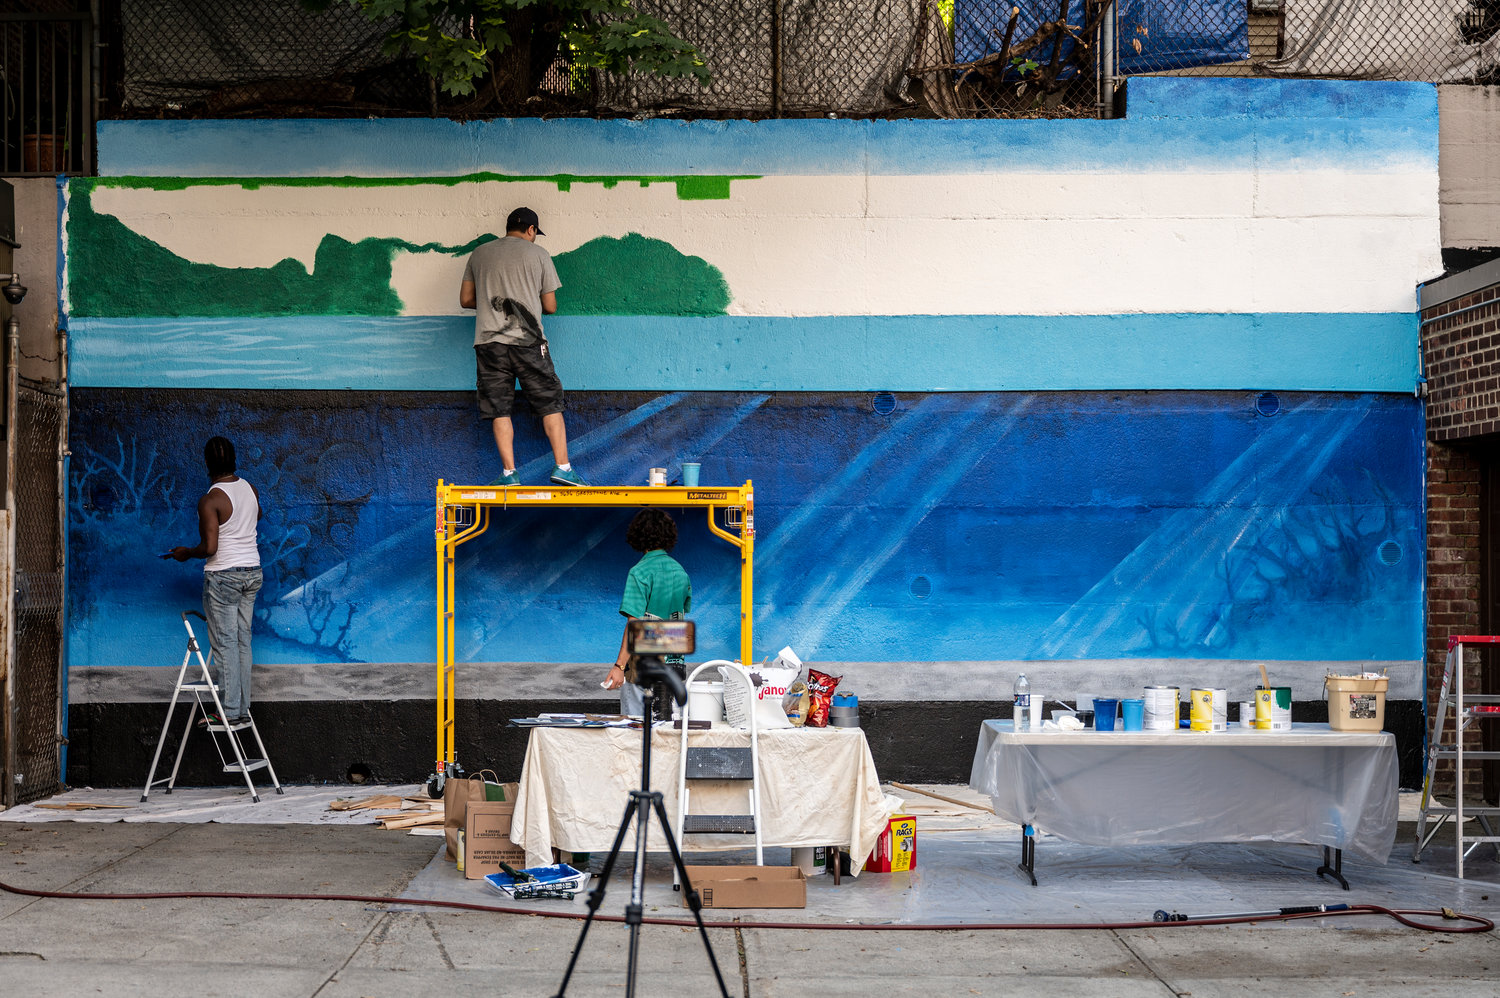 Artist Nicky Enright joins a volunteer painting a mural on the back retaining wall of 3636 Greystone Ave., where he lives. Enright was commissioned to paint this mural, ‘Aquarium,’ by his building’s co-op board because he’s no stranger to mural painting.